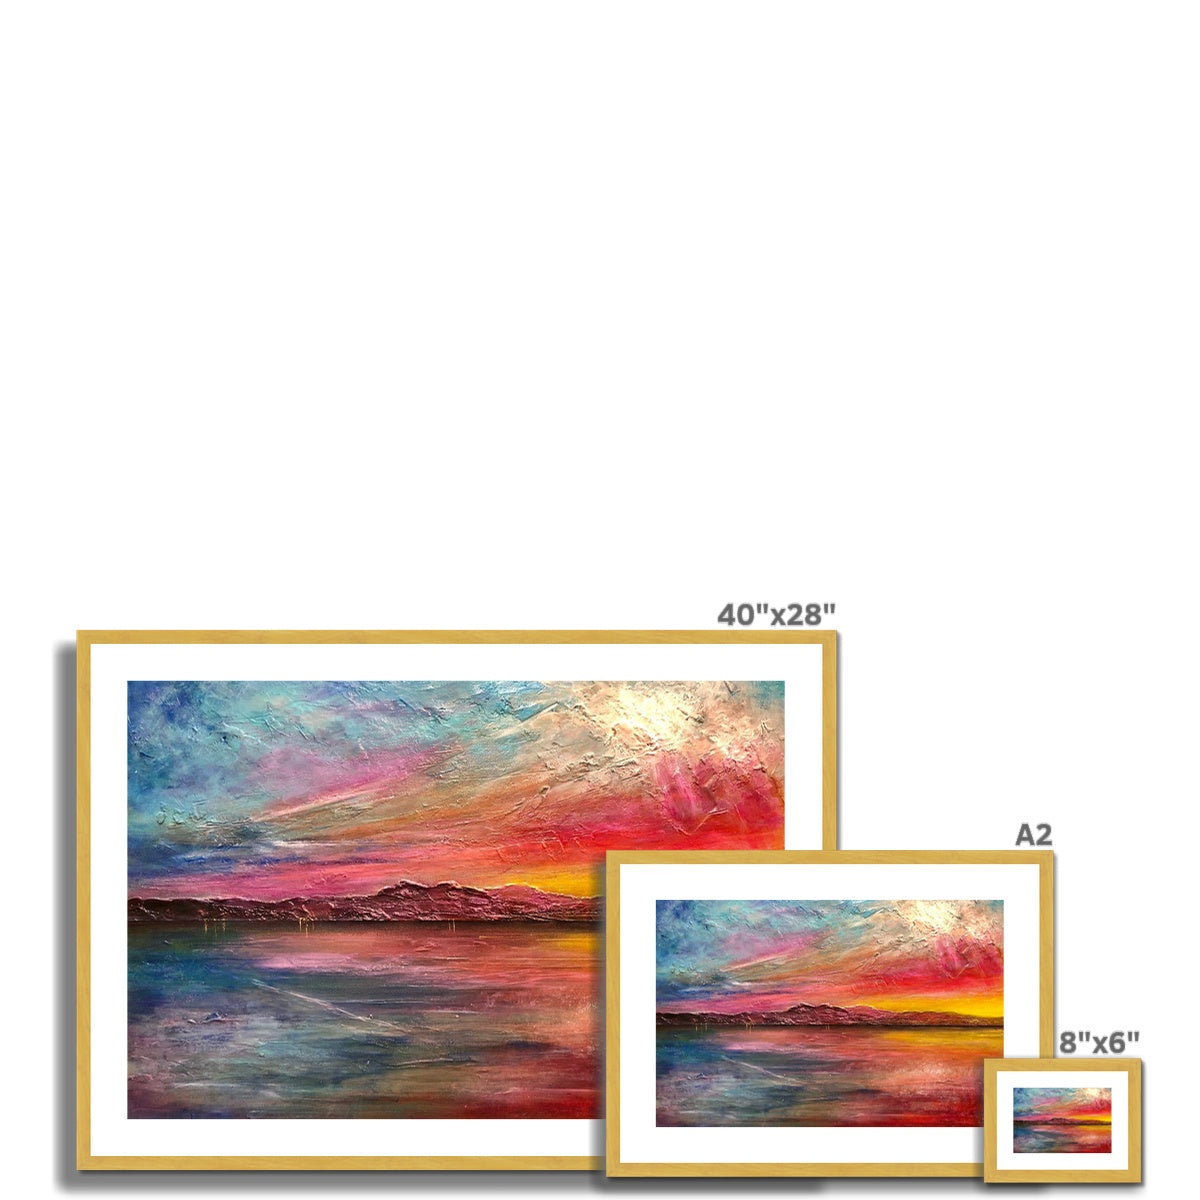 Arran Sunset ii Painting | Antique Framed & Mounted Prints From Scotland-Antique Framed & Mounted Prints-Arran Art Gallery-Paintings, Prints, Homeware, Art Gifts From Scotland By Scottish Artist Kevin Hunter